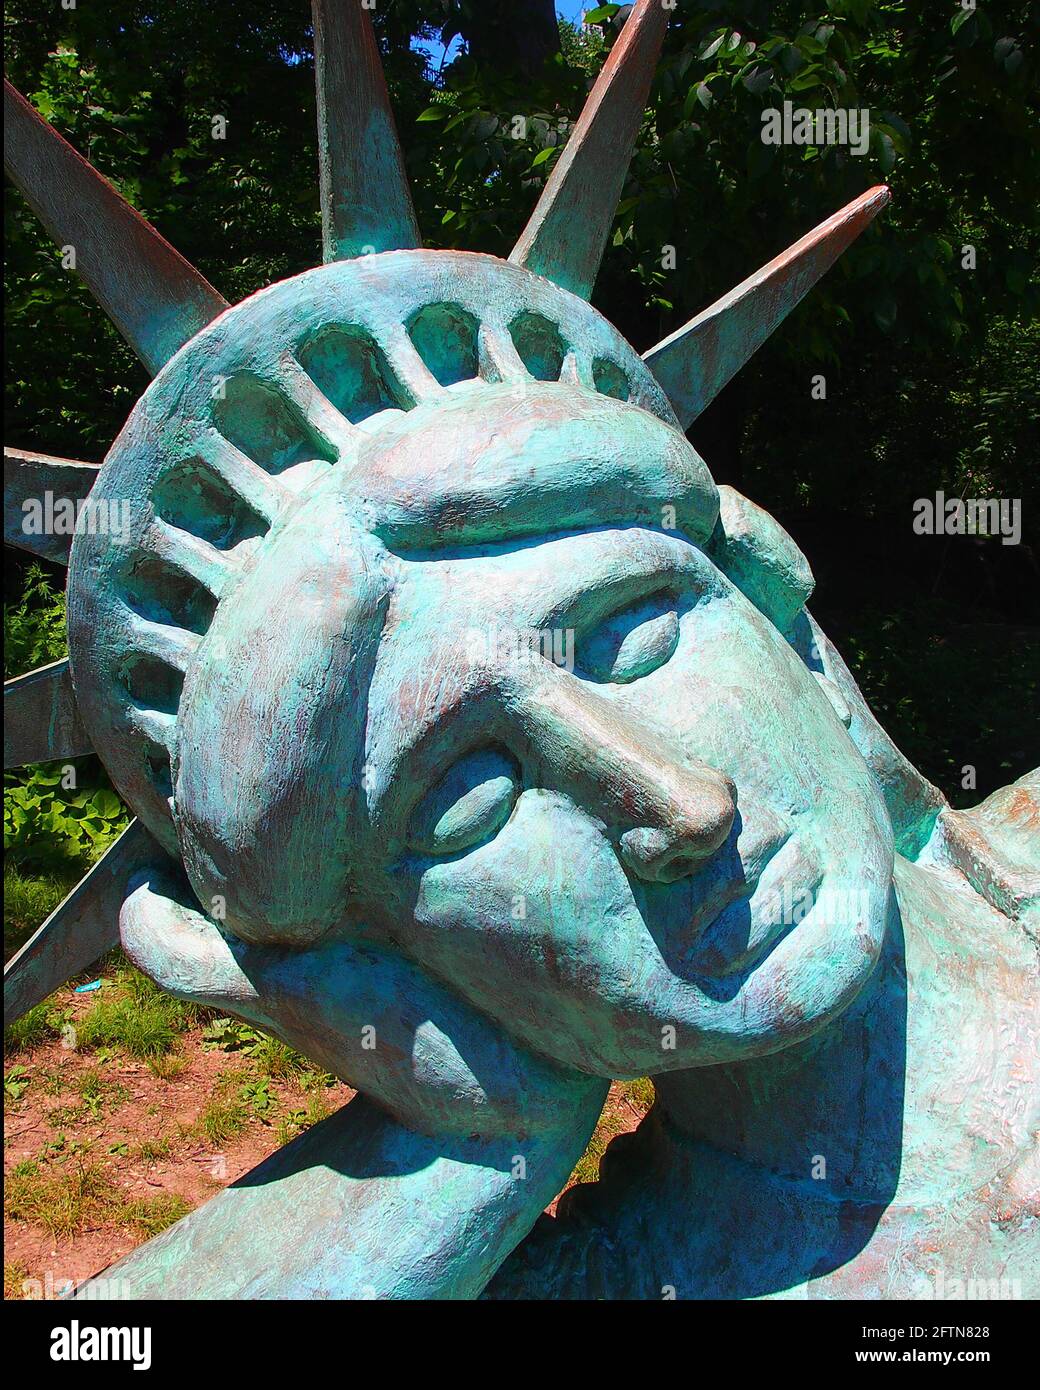 New York, New York, USA. 21st May, 2021. Artist Zaq Landsberg's sculpture entitled ''Reclining Liberty'' inside Morningside Park in New York City .The sculpture was created by Landsberg and features the Statue of Liberty posed on her side with her head propped up by her hand. The 25 foot long sculpture is covered in oxidized copper paint and features a steel crown and was created using wood, foam and plaster resin. Credit: Debra L. Rothenberg/ZUMA Wire/Alamy Live News Stock Photo